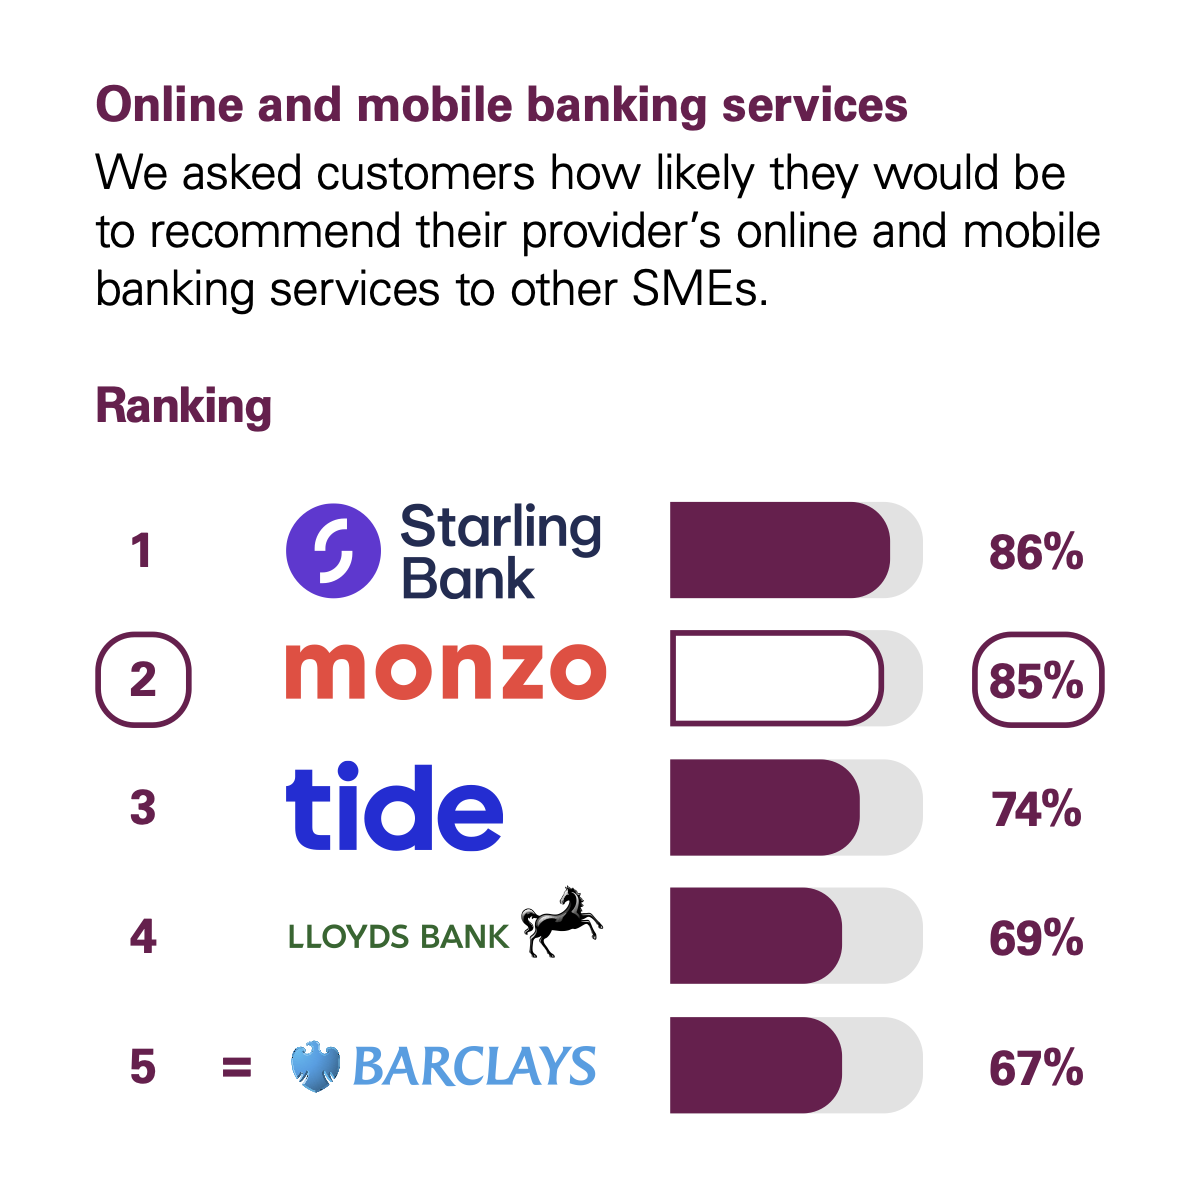 Graph showing the results of the CMA scoring of UK banks in the Online and Mobile Banking Services category. The CMA asked customers how likely they would be to recommend their provider's online and mobile banking services to other small and medium-sized enterprises (SMEs*). The rankings with percentage scores are: 1st Starling Bank with 86%. 2nd Monzo with 85%. 3rd Tide with 74%. 4th Lloyds Bank with 69%. 5th Barclays with 67%.